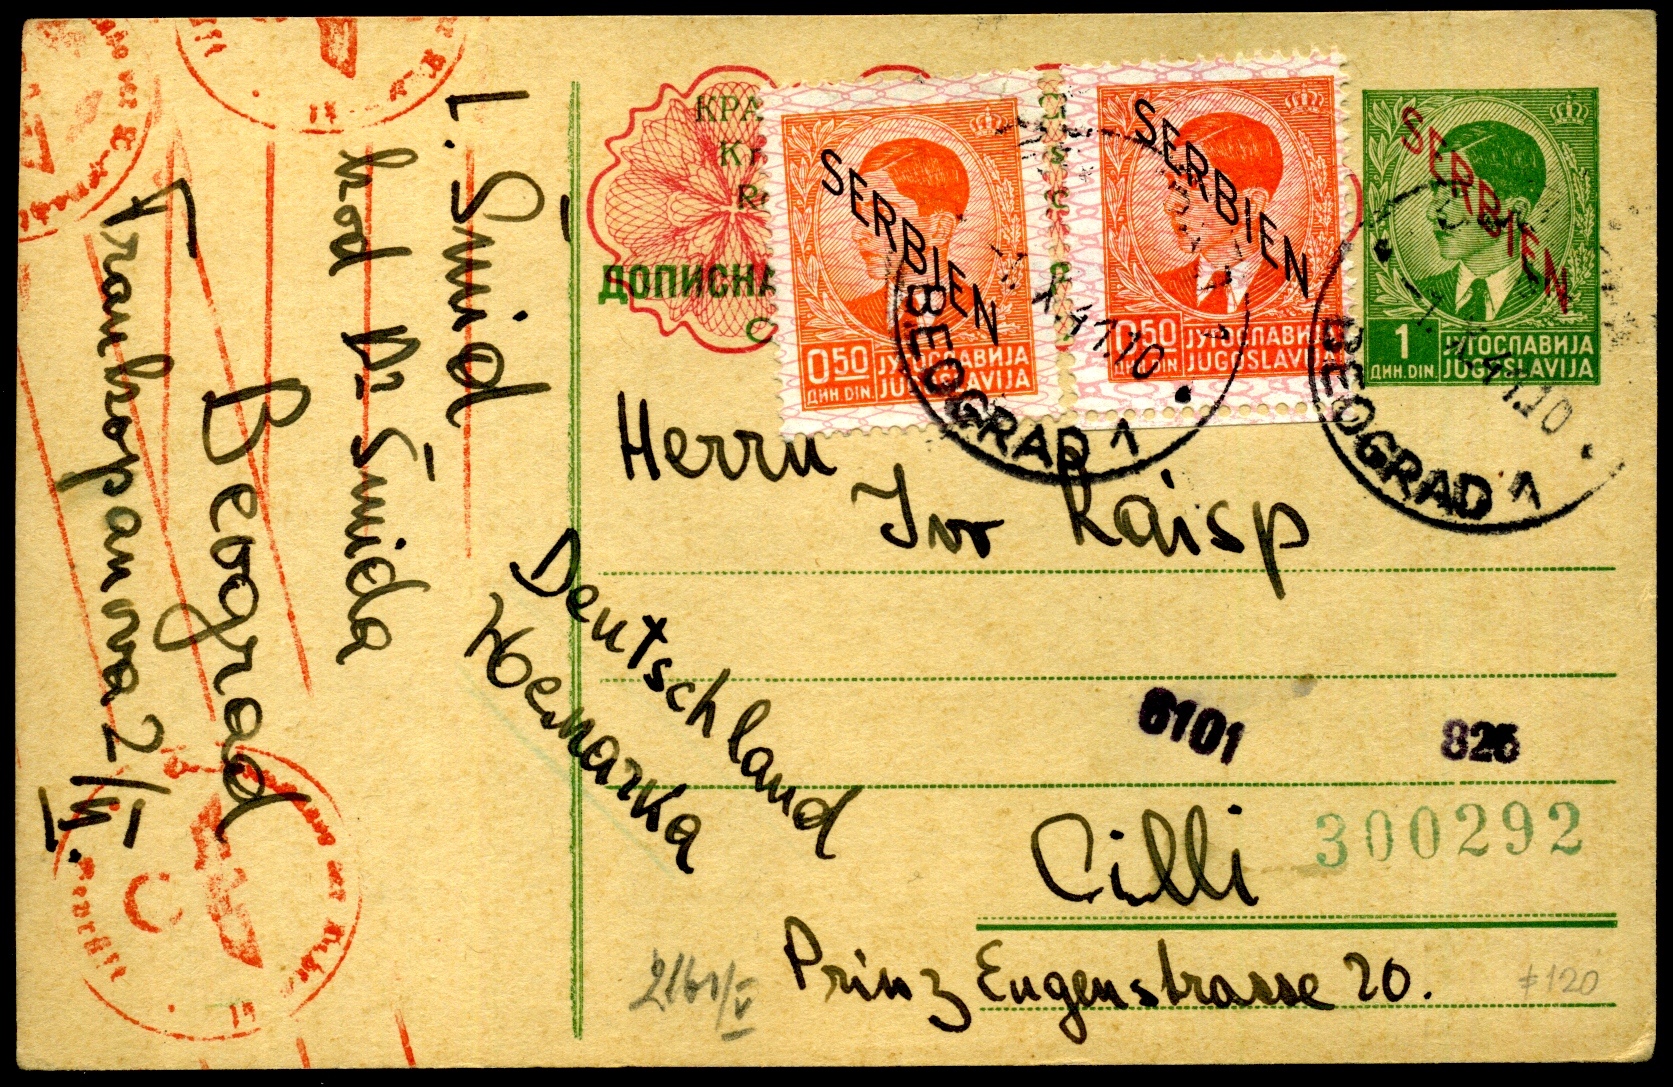 Postal Stationery from the German Occupation of Serbia